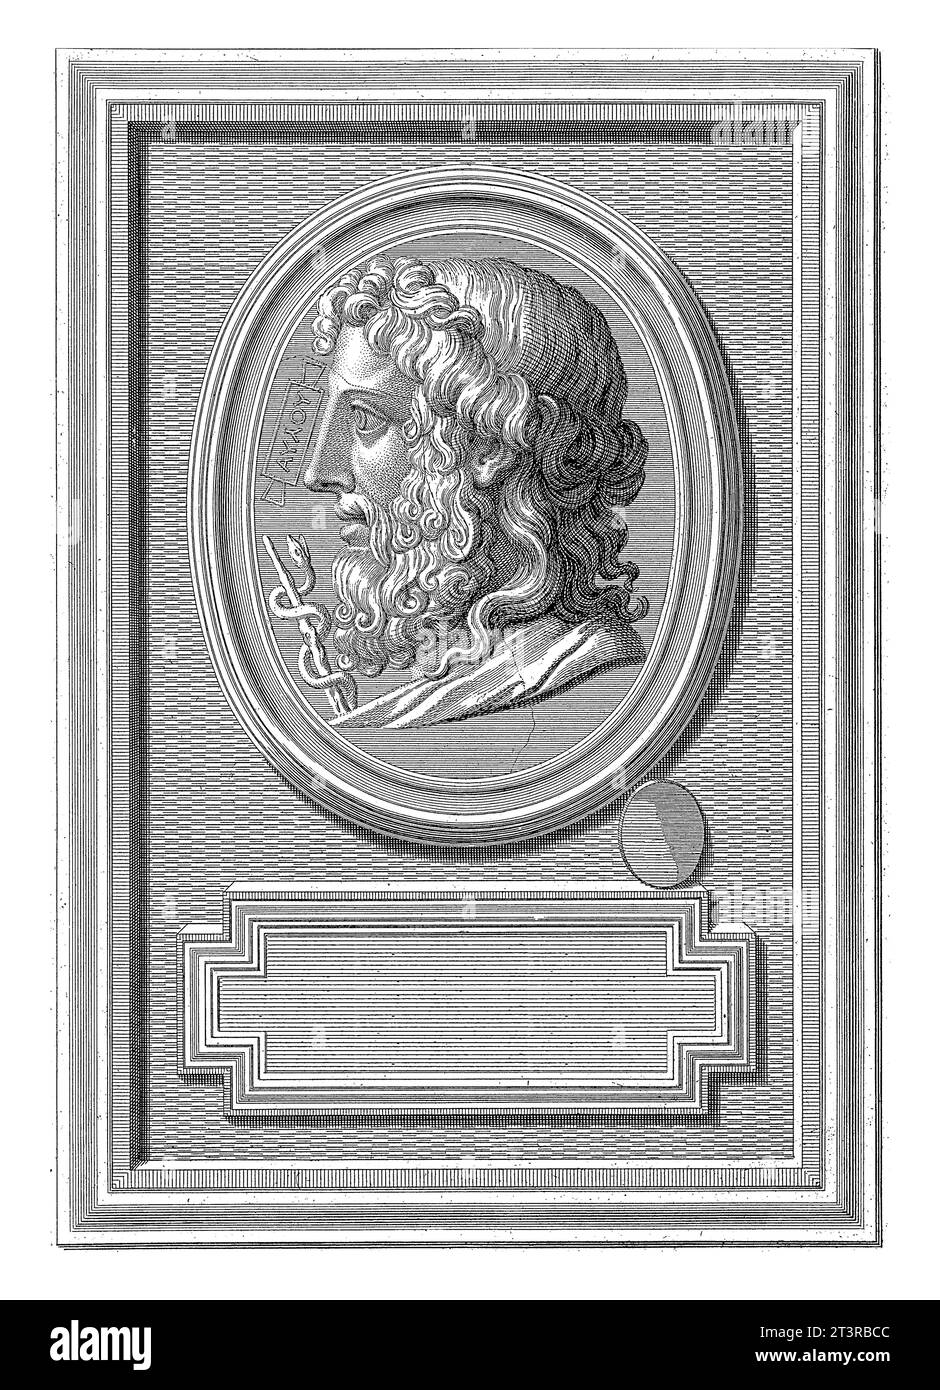 Carved stone with the effigy of Aesculapius, Bernard Picart, 1722 The portrait of Aesculapius and profile. Reproduction of a Greek carved gemstone. Stock Photo